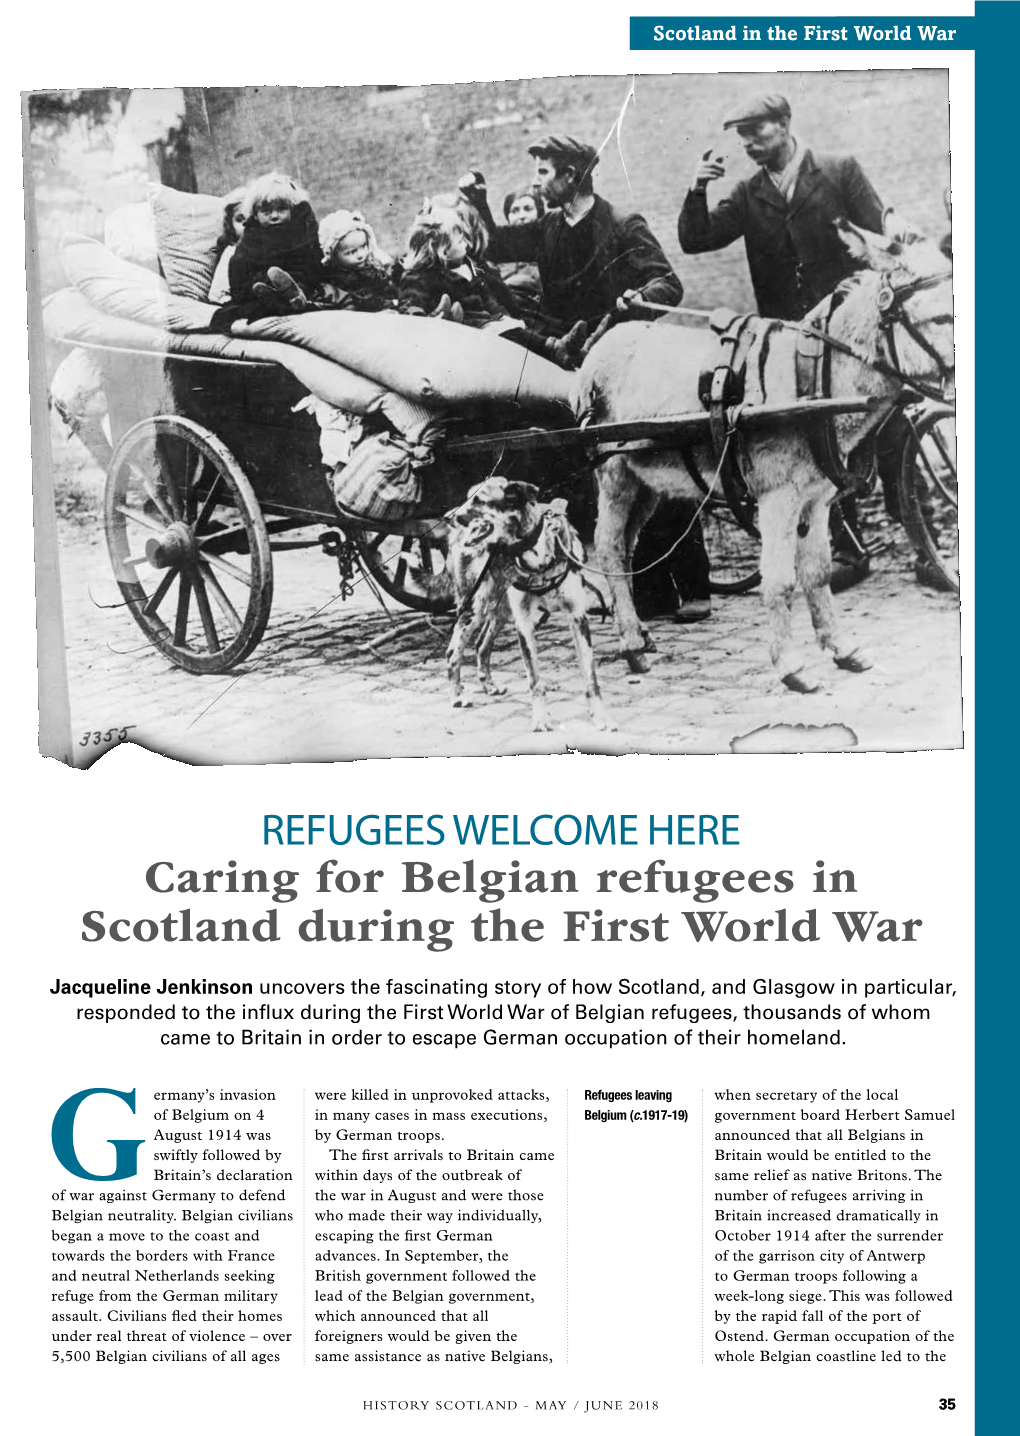 Caring for Belgian Refugees in Scotland During the First World War